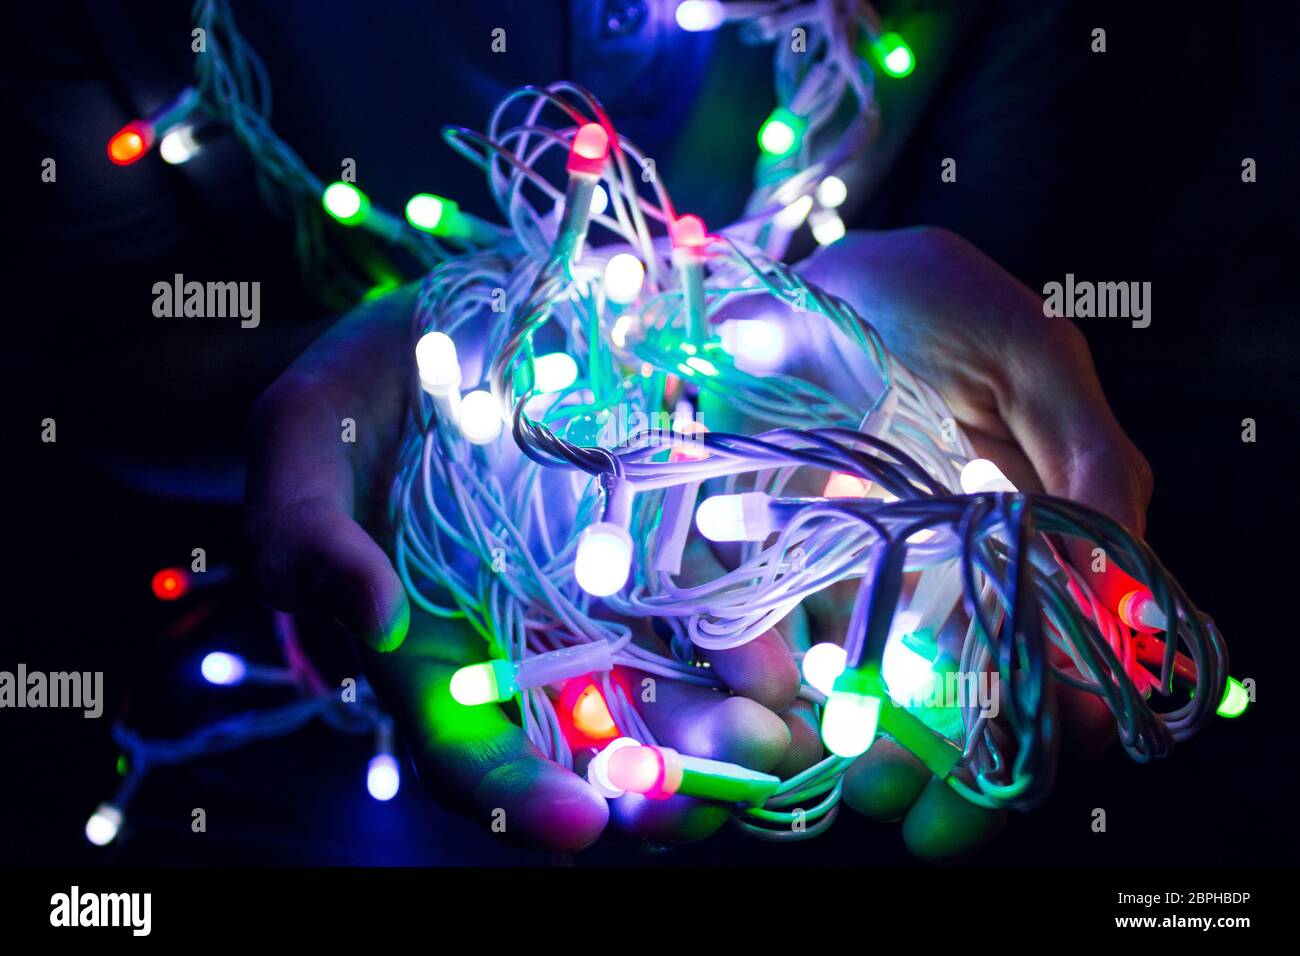 Boy holding Christmas lights in his hands. Holiday spirit idea. Vibrant colors. Shallow deph of field. Lots of colors Stock Photo